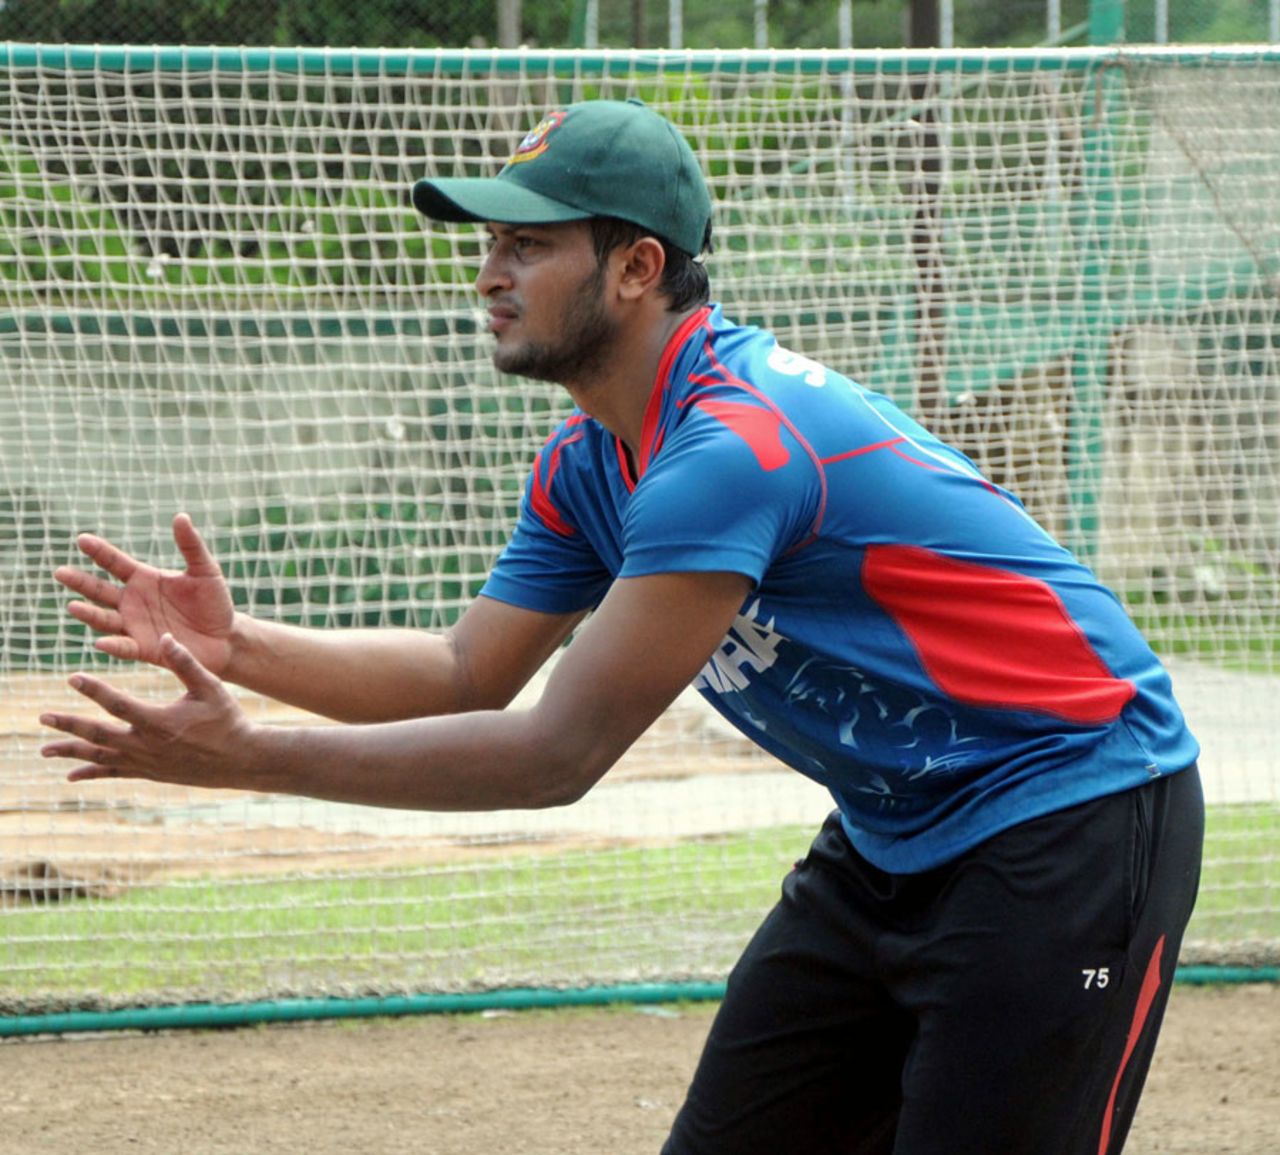 Shakib Al Hasan works on his catching skills during a training session, Mirpur, August 31, 2014